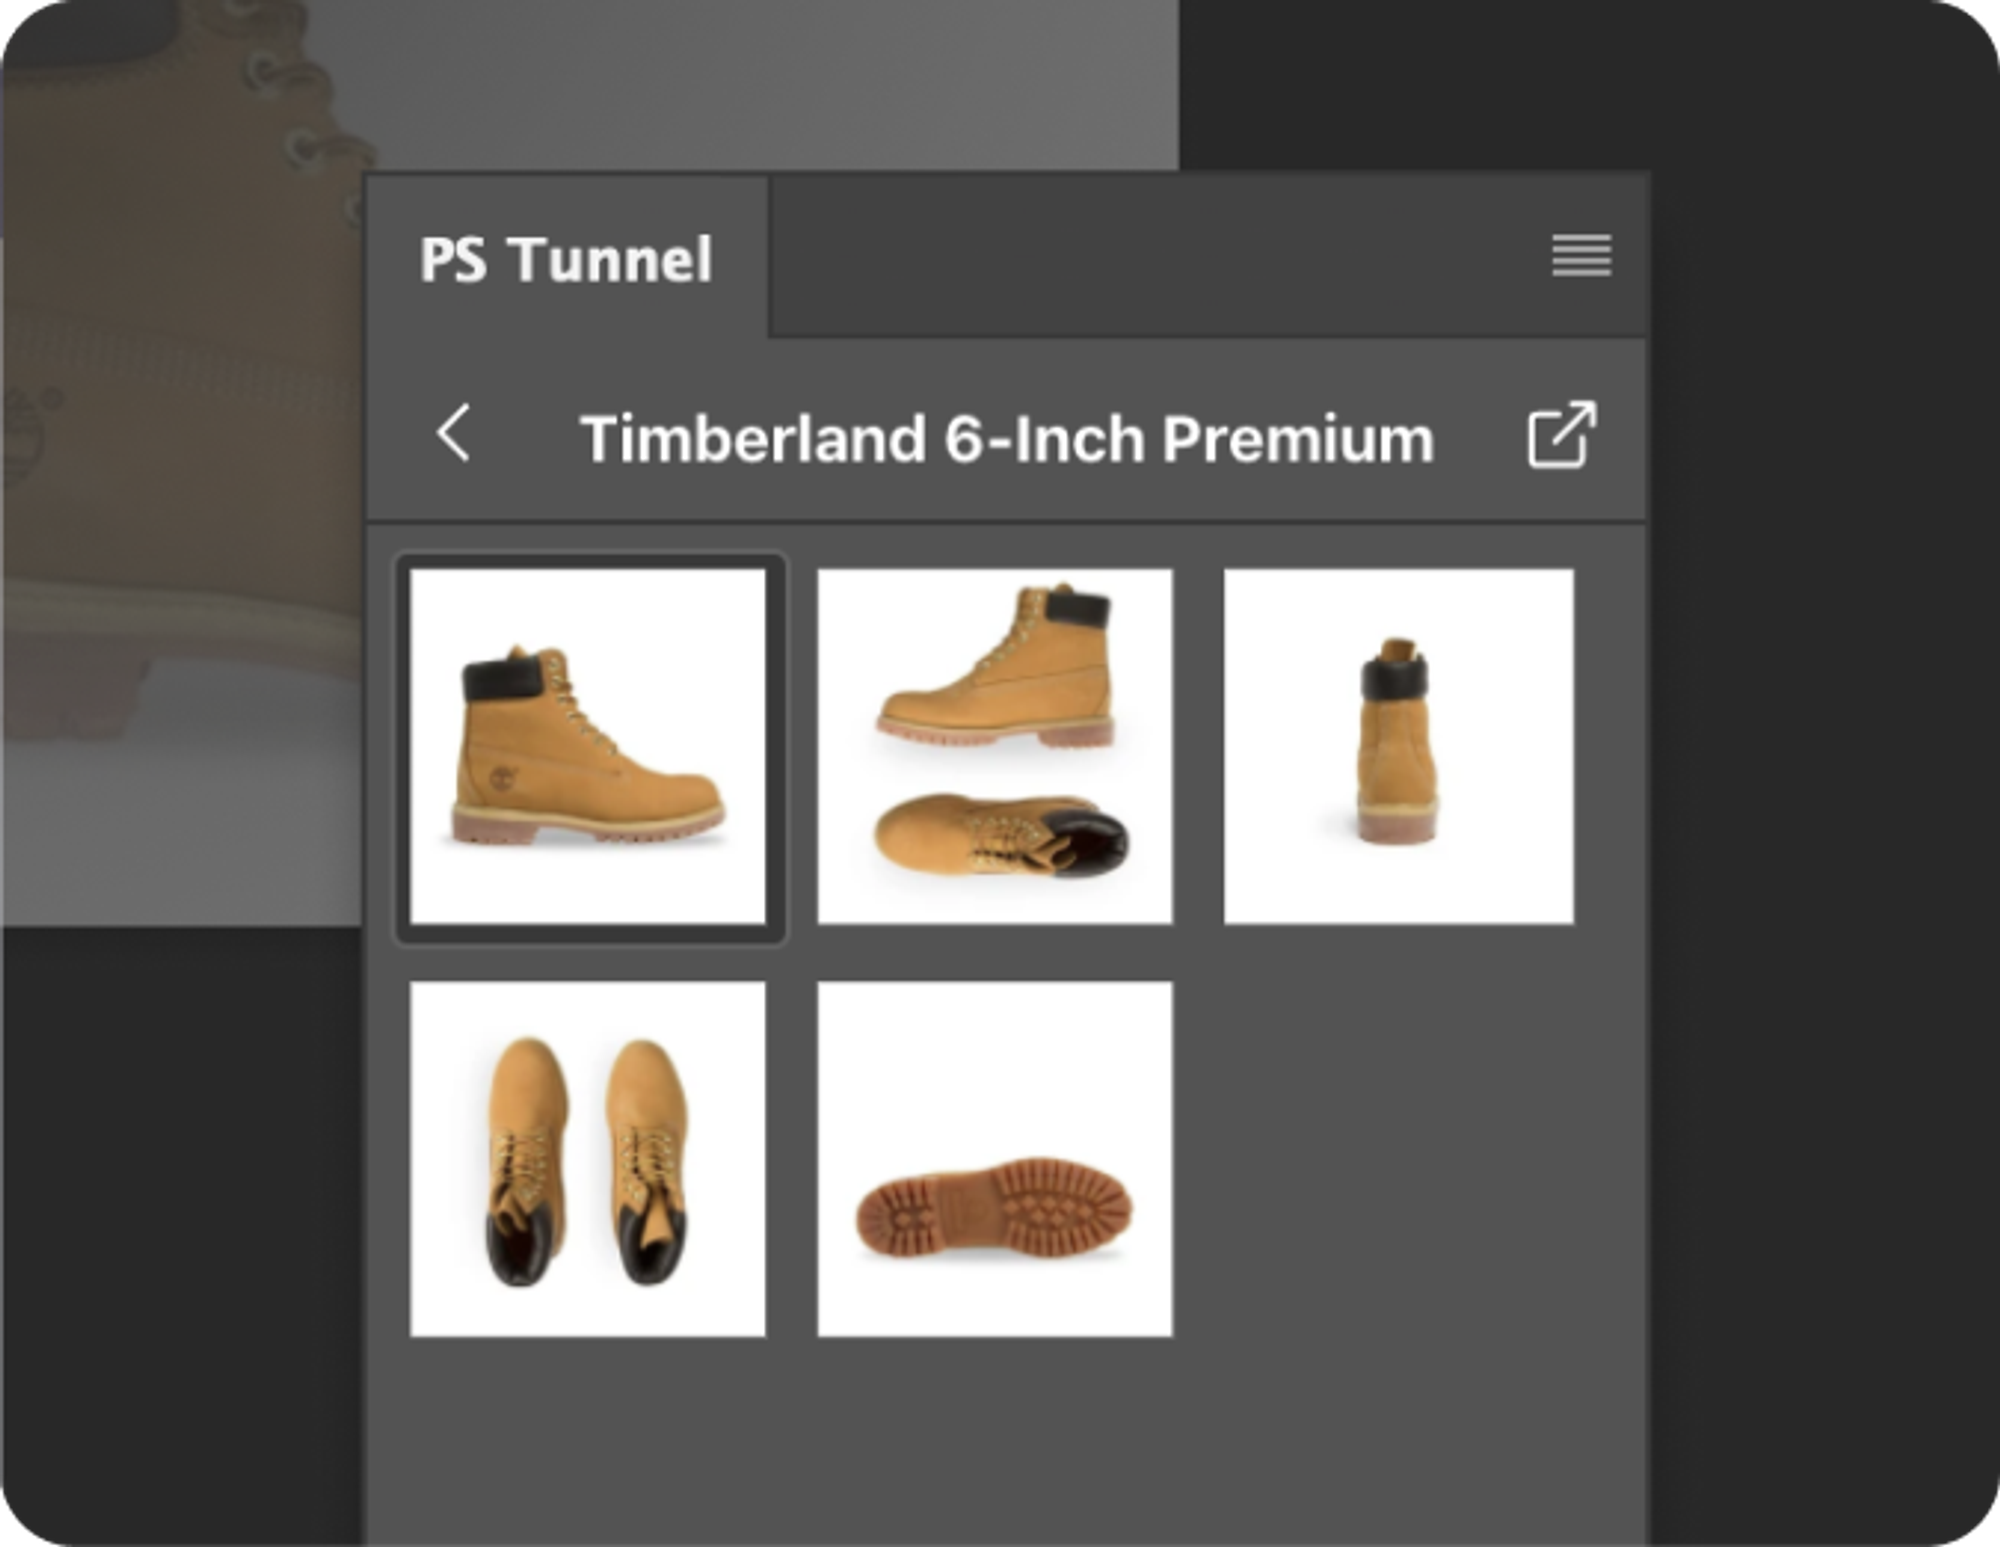 The Photoshop Extension for PS Tunnel